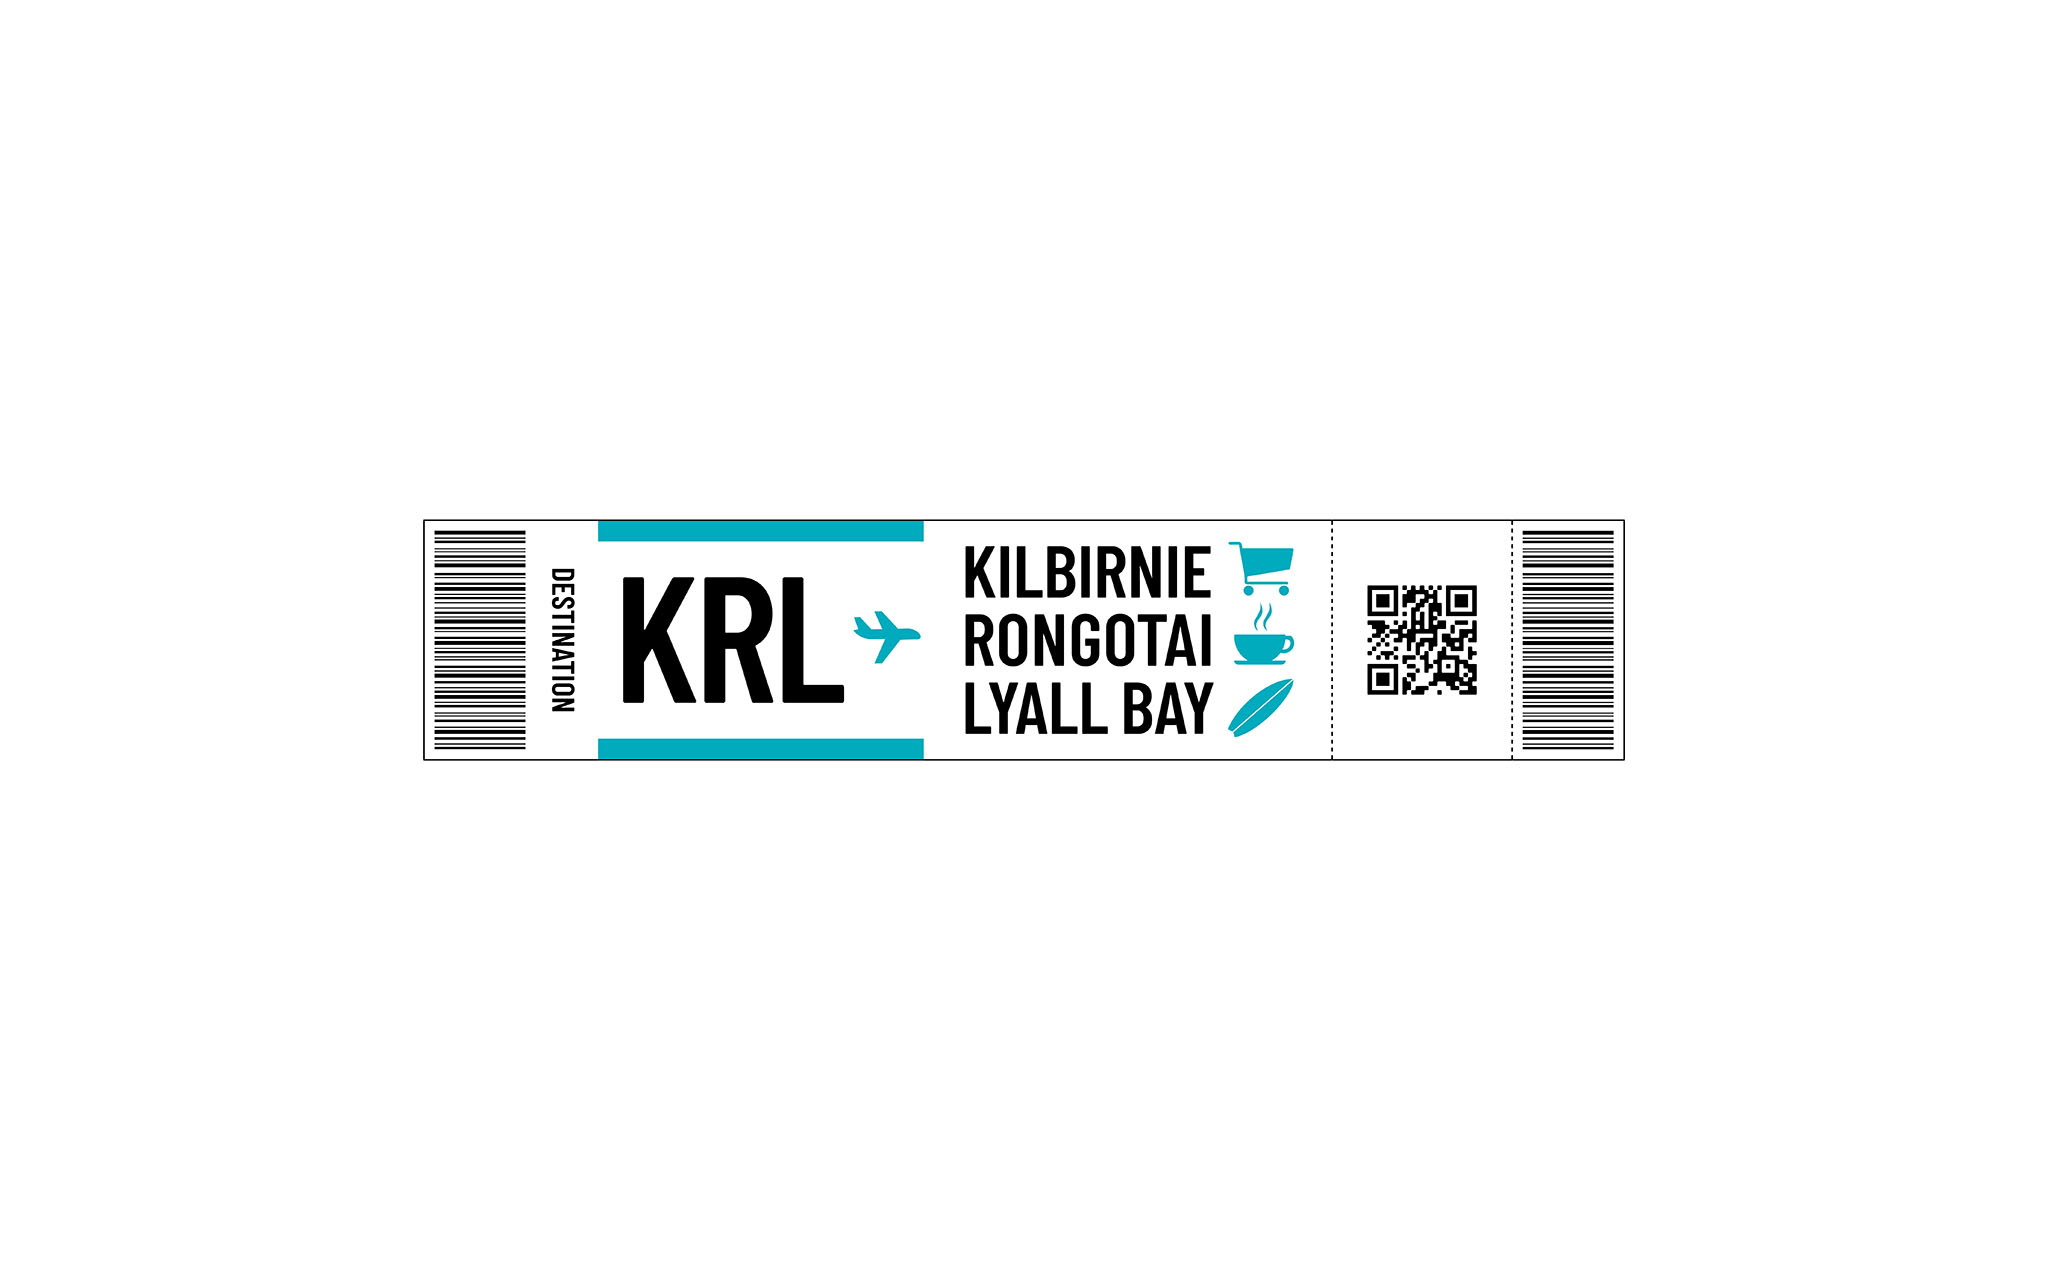 We created a new brand to launch the merger of the Kilbirnie Business Network with Rongotai and Lyall Bay – three distinctive areas in Wellington.